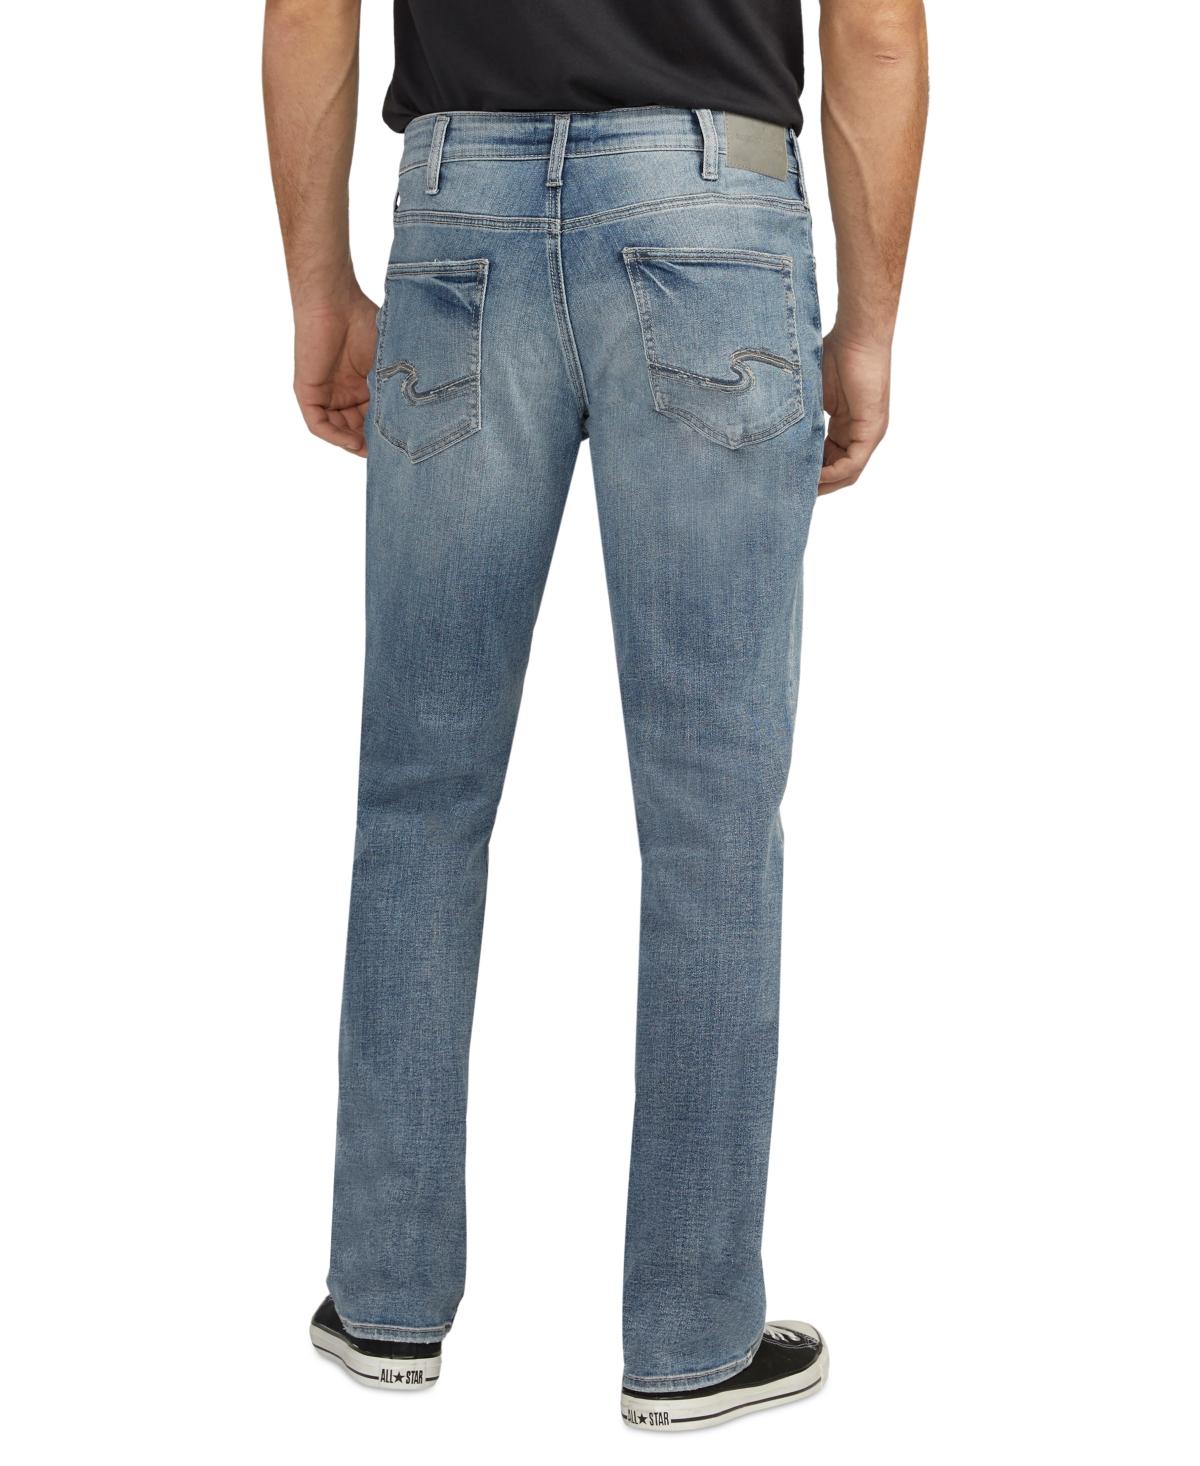 Silver Jeans Co. Grayson Classic-fit Jeans in Blue for Men